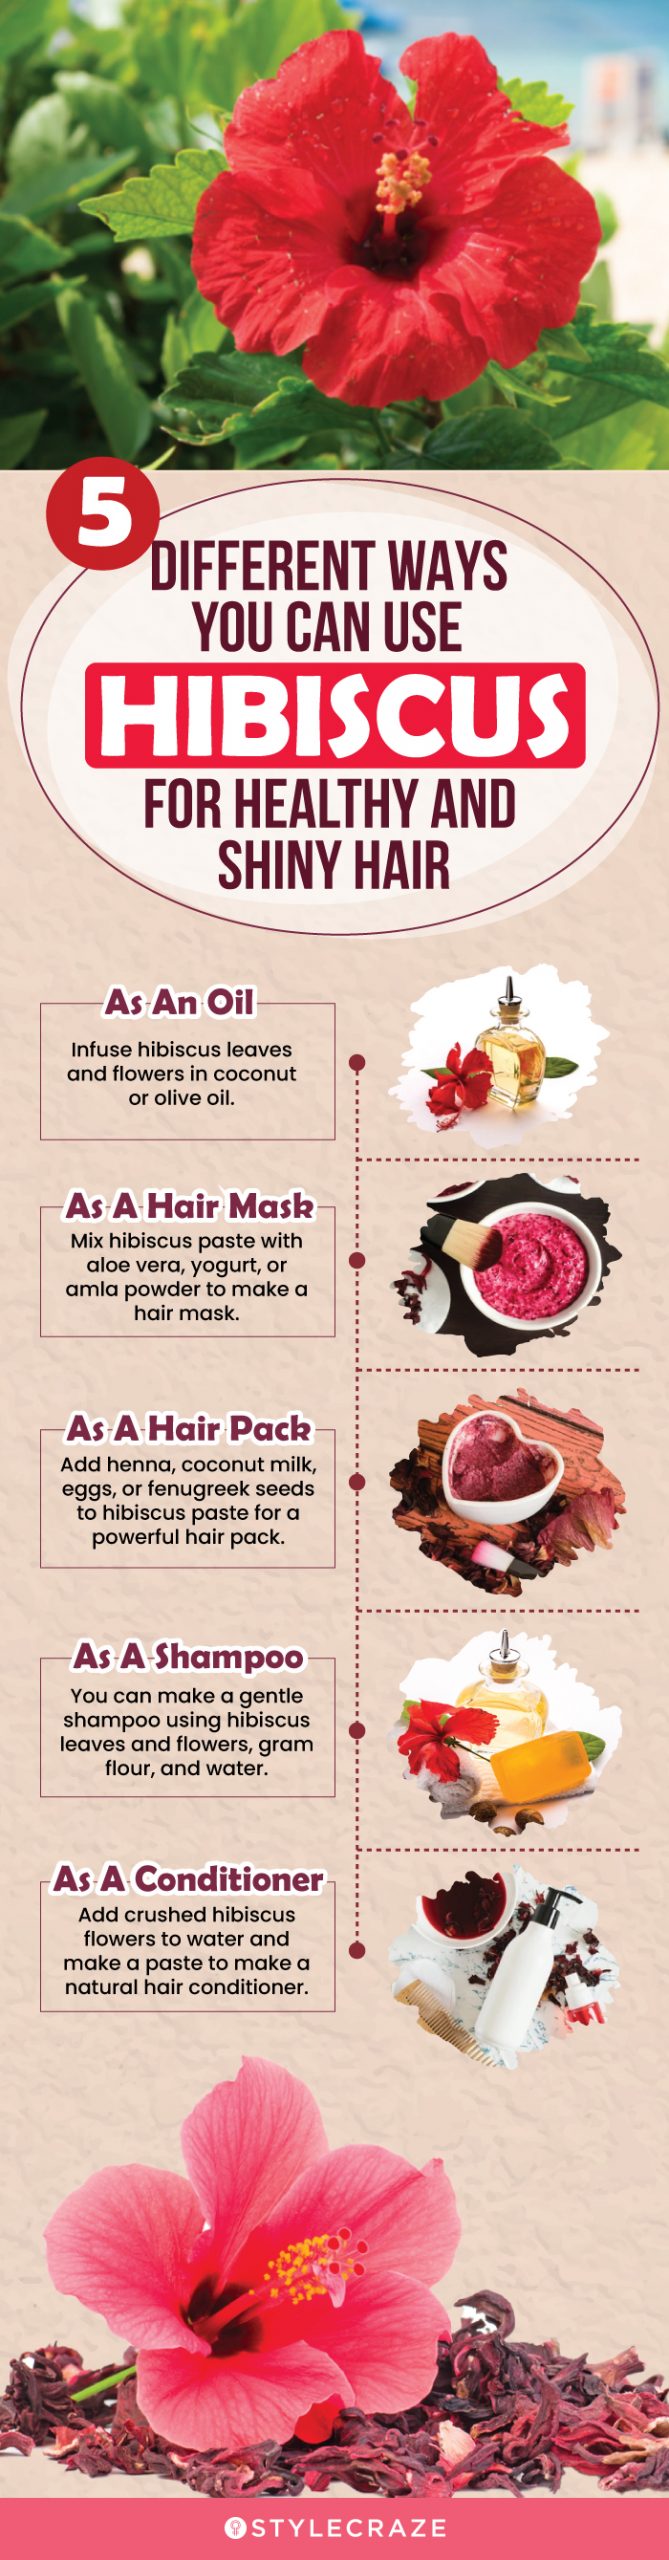 5 different ways you can use hibiscus for healthy and shiny hair (infographic)